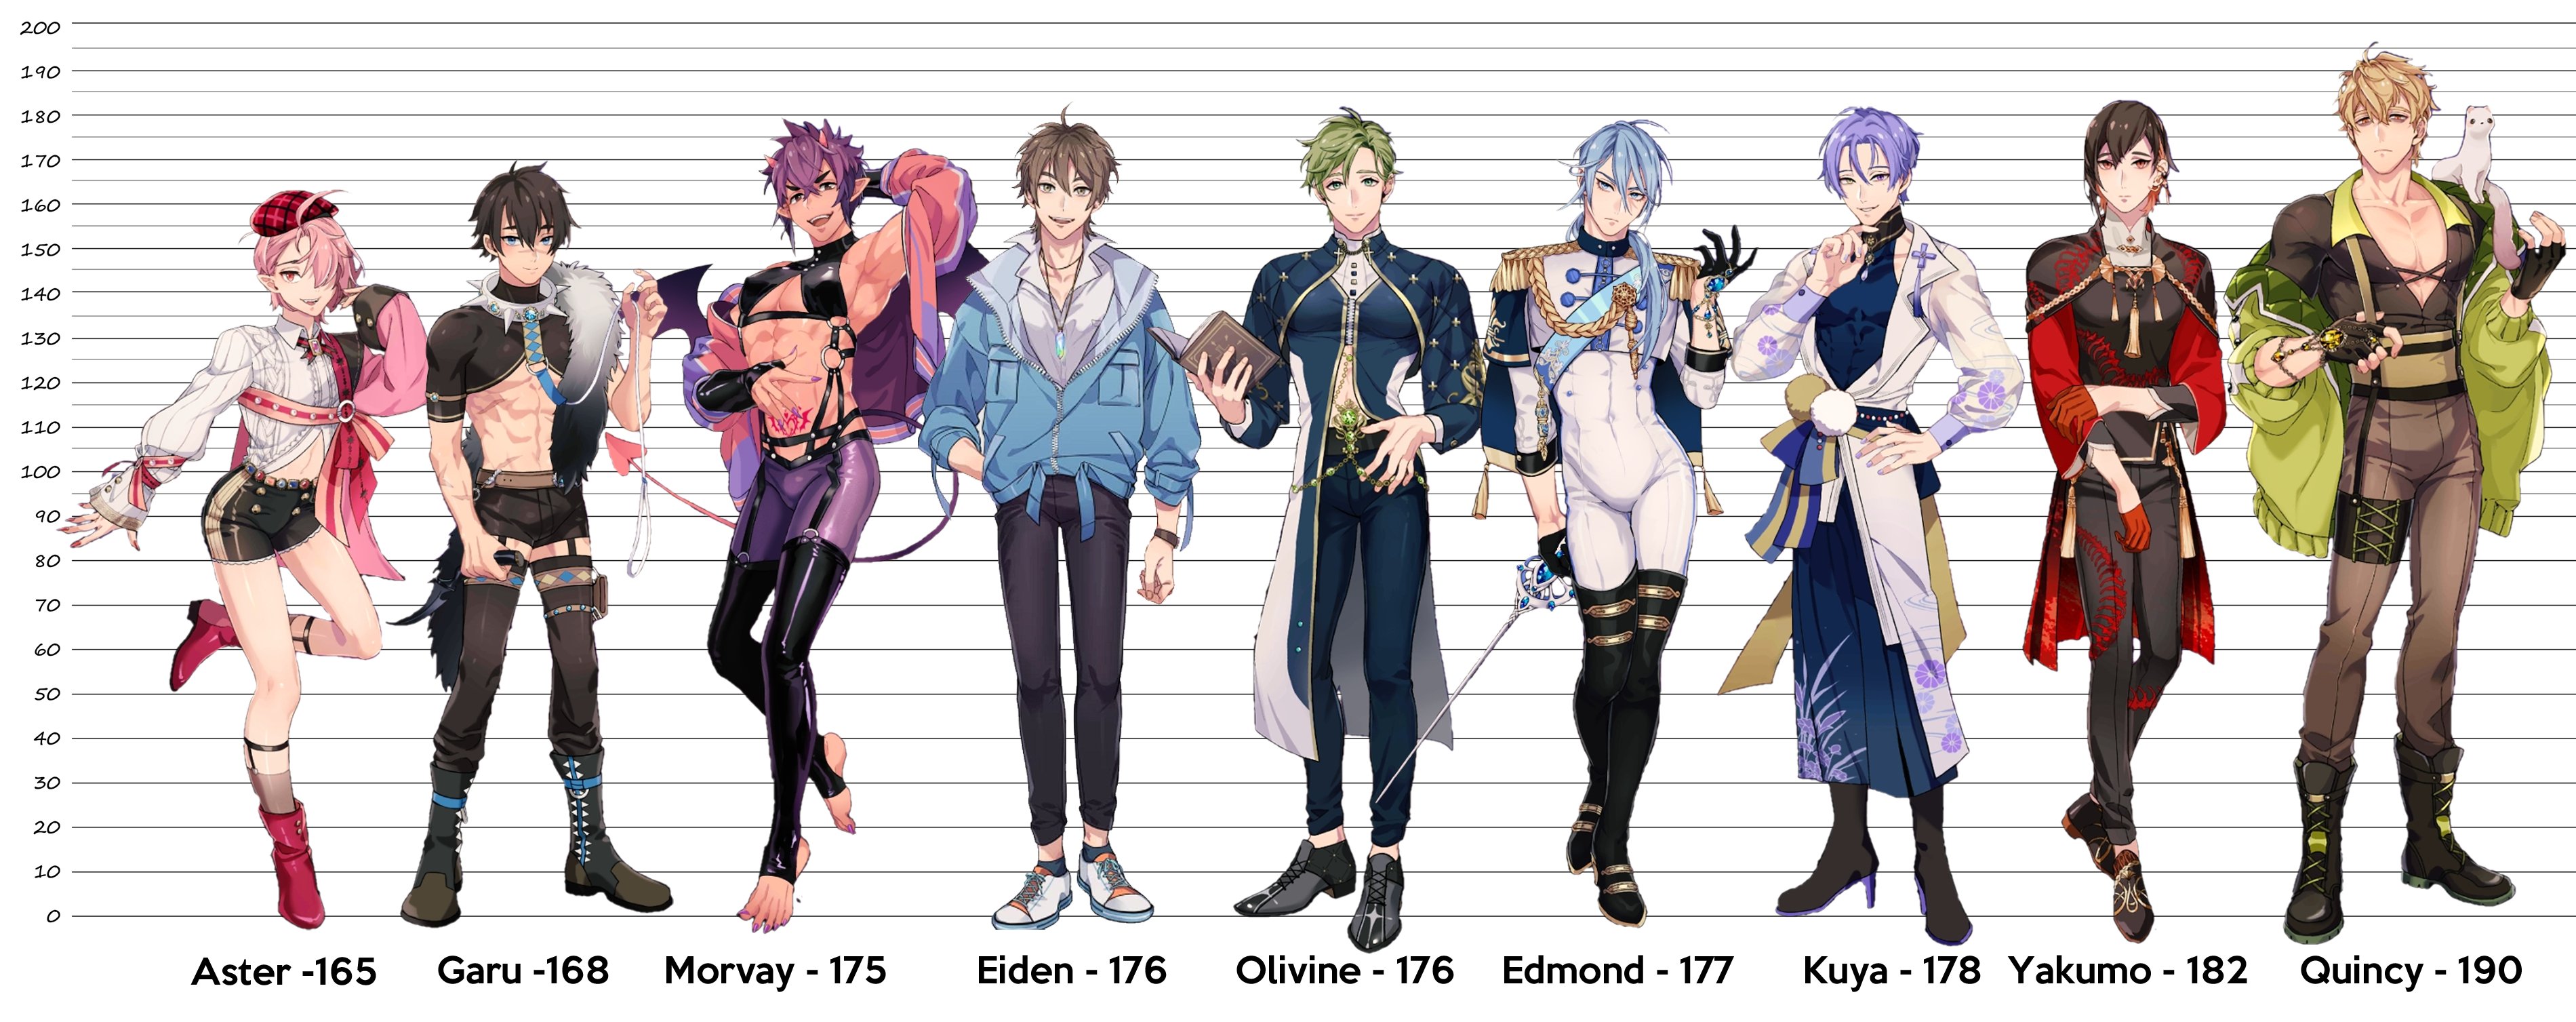 I made a height chart for the NU: Carnival characters. 